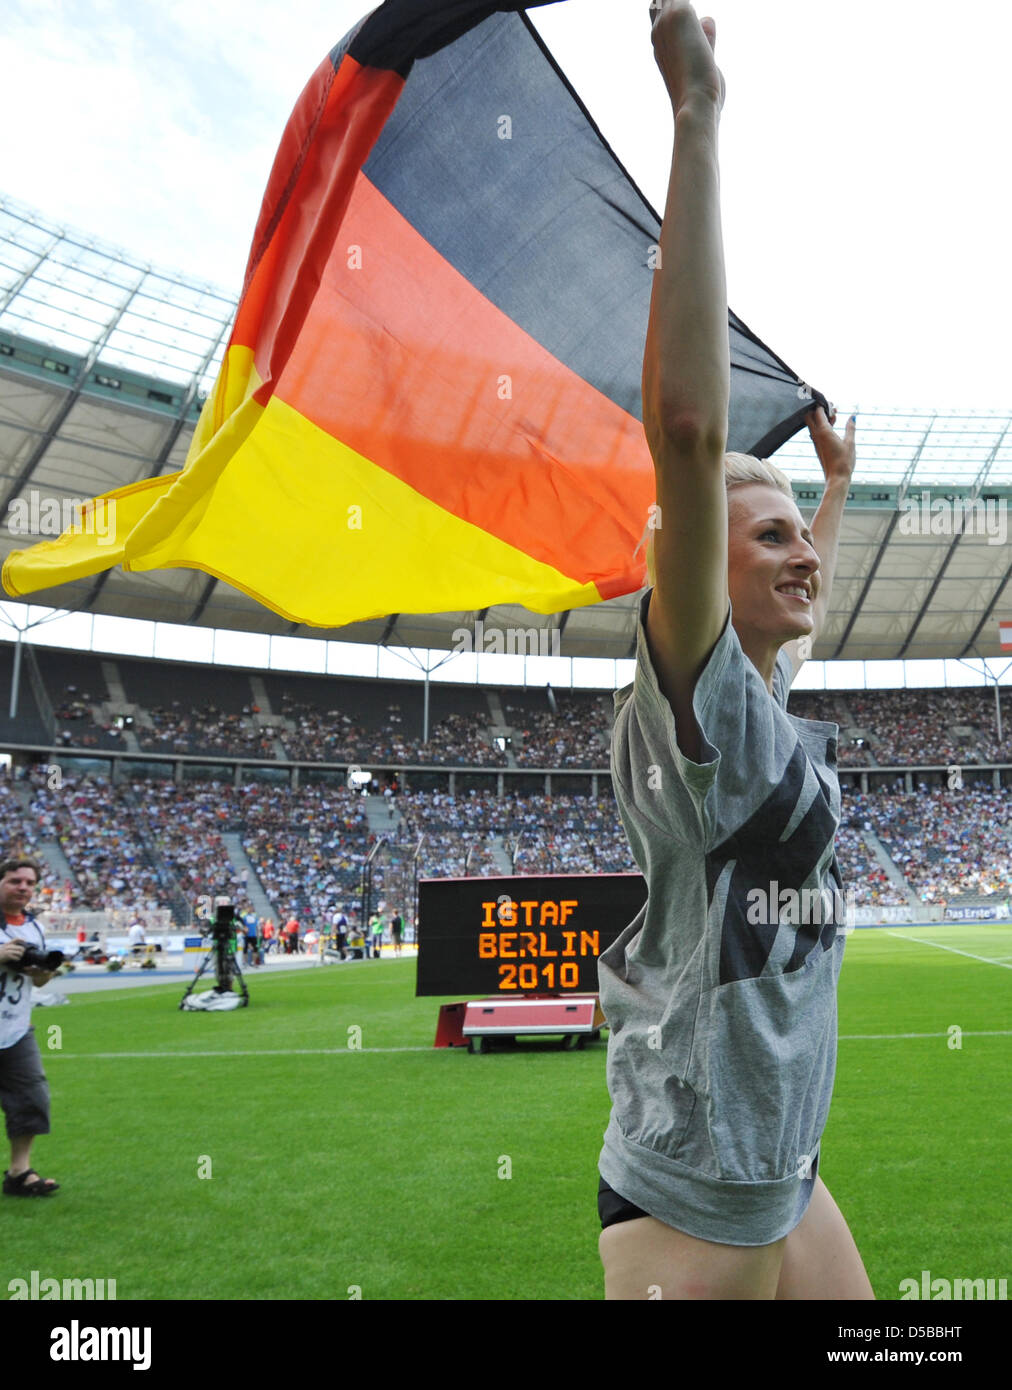 German Ariane Friedrich celebrates her victory of the High Jump competition at the International Stadium Festival ISTAF in Berlin, Germany, 22 August 2010. Photo: Rainer Jensen Stock Photo